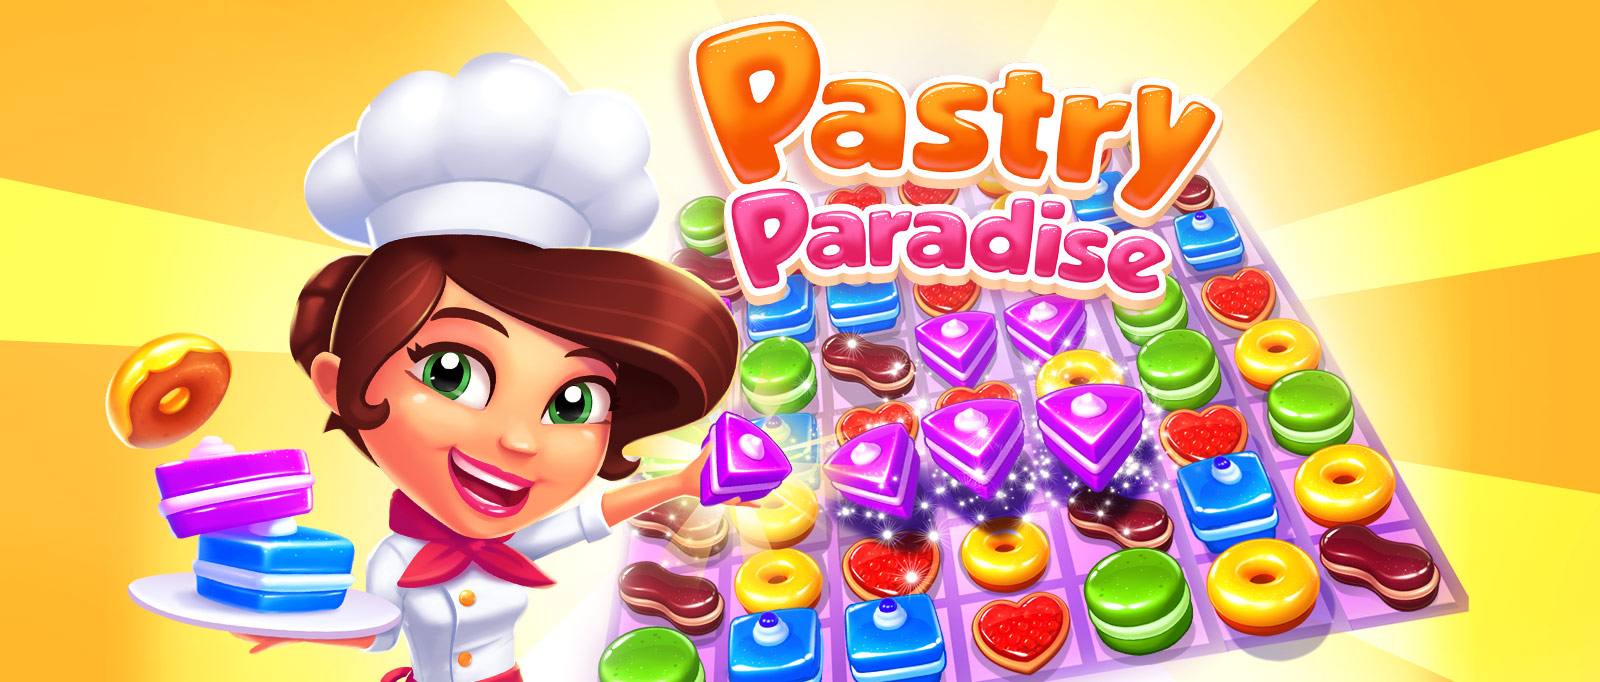 Pastry Paradise